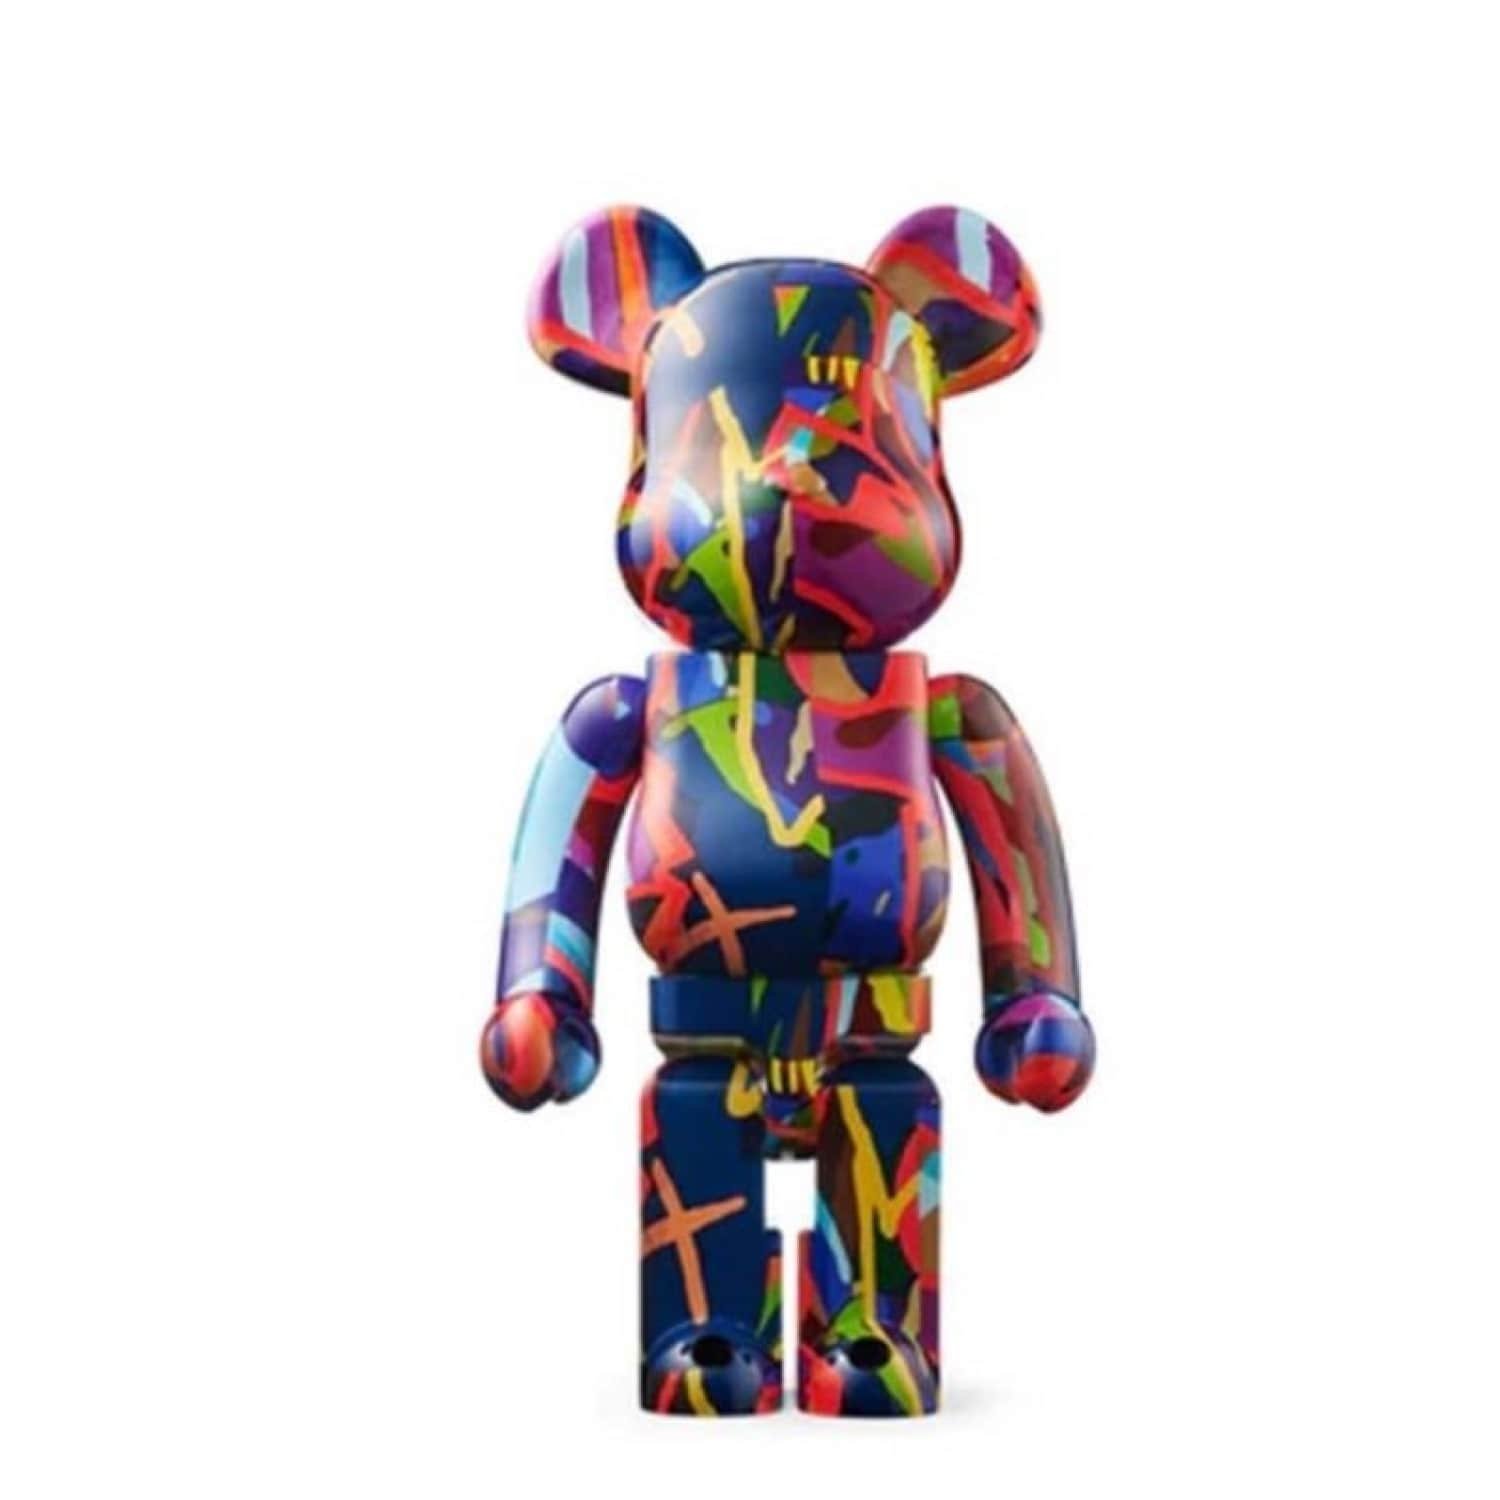 Kaws Tension” from Be@rbrick - Dope! Gallery